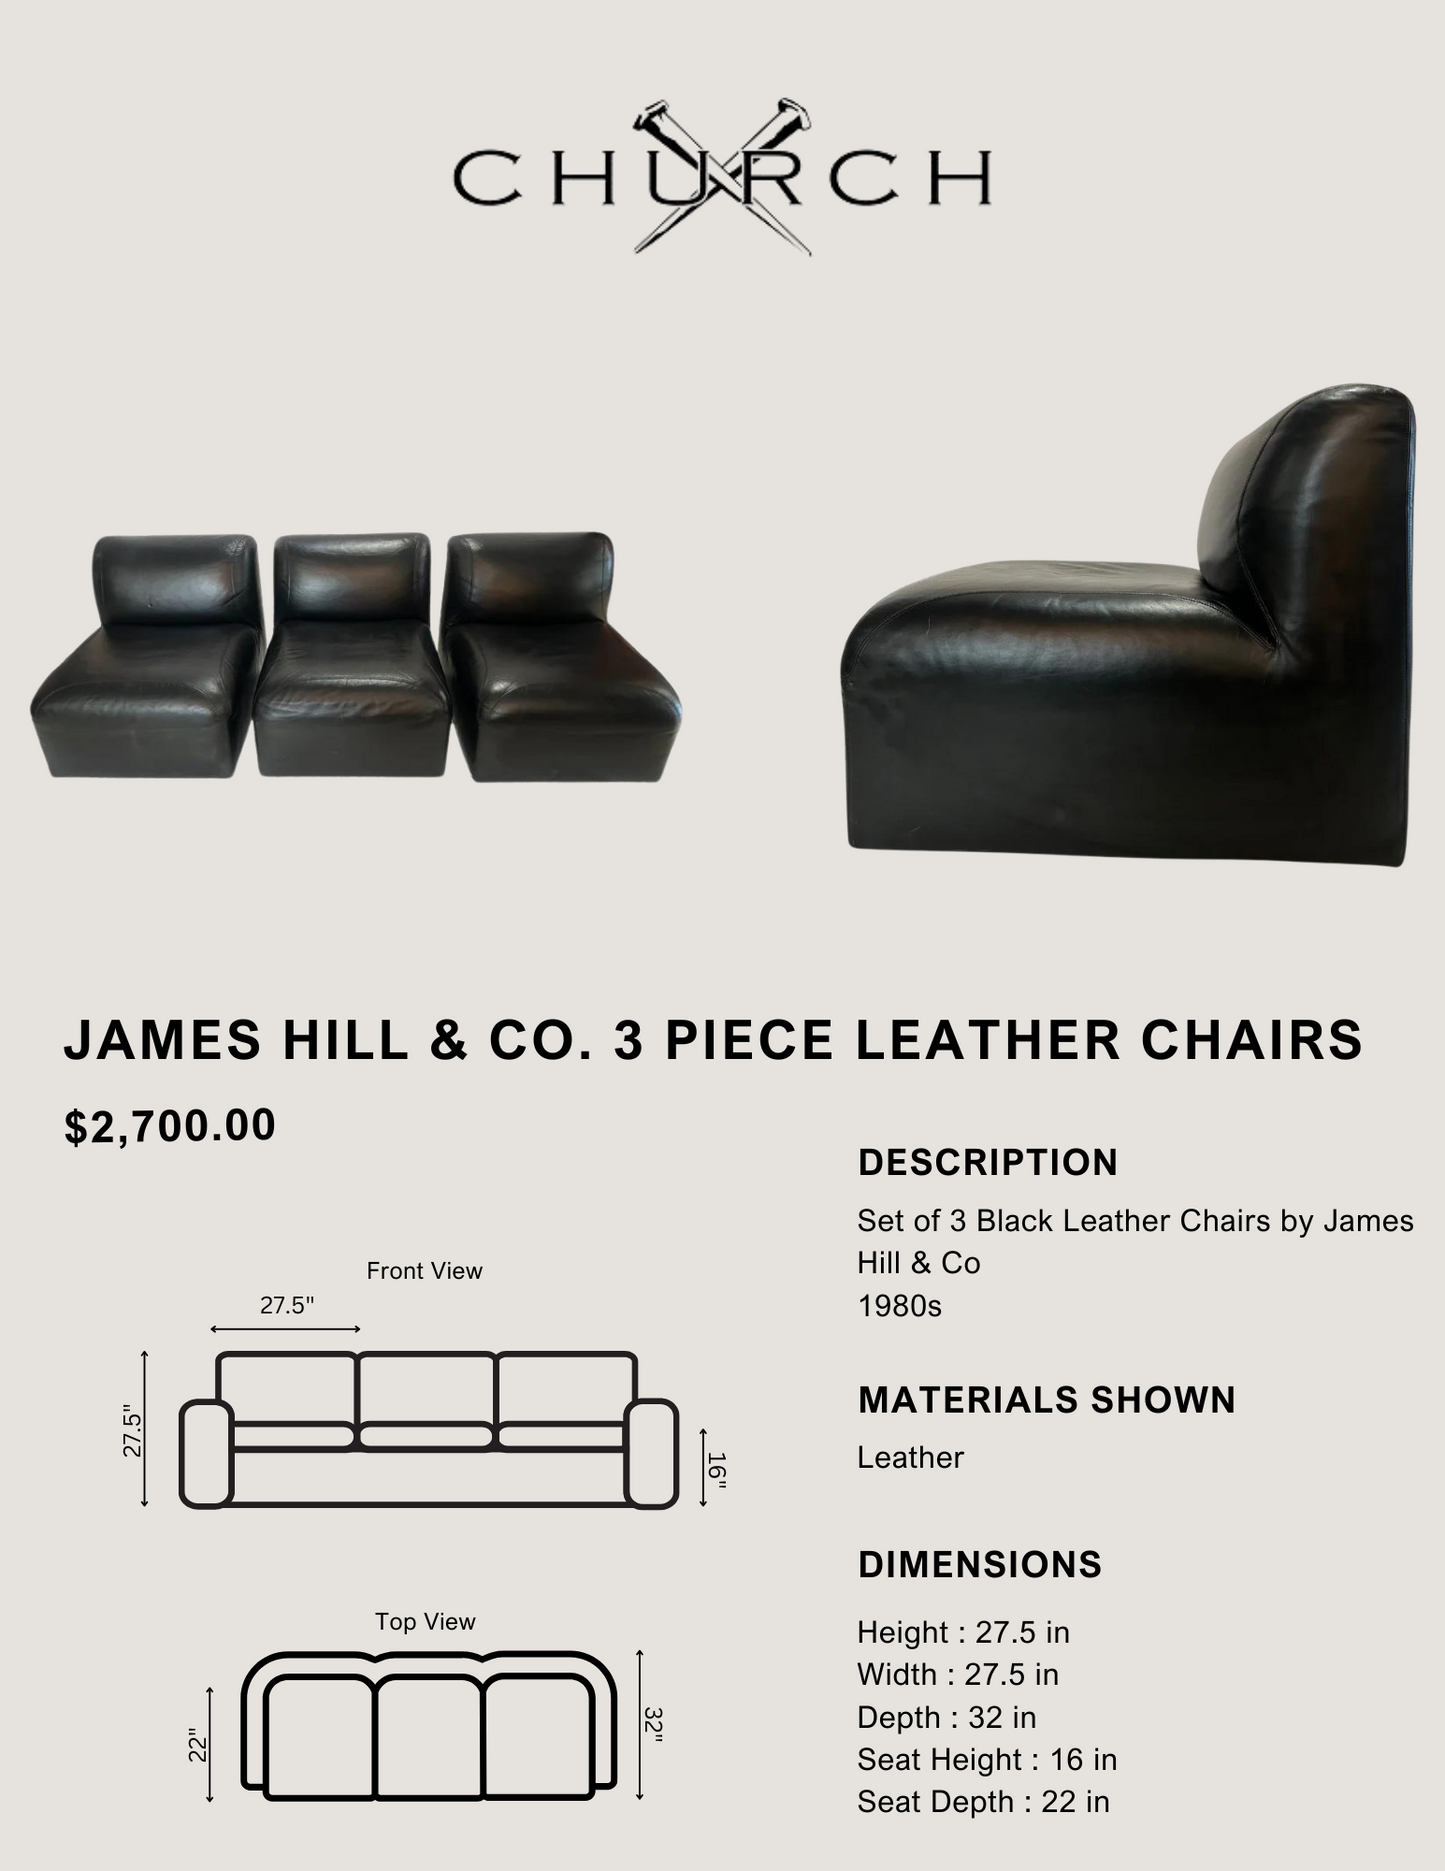 James Hill & Co. 3 Piece Leather Chairs